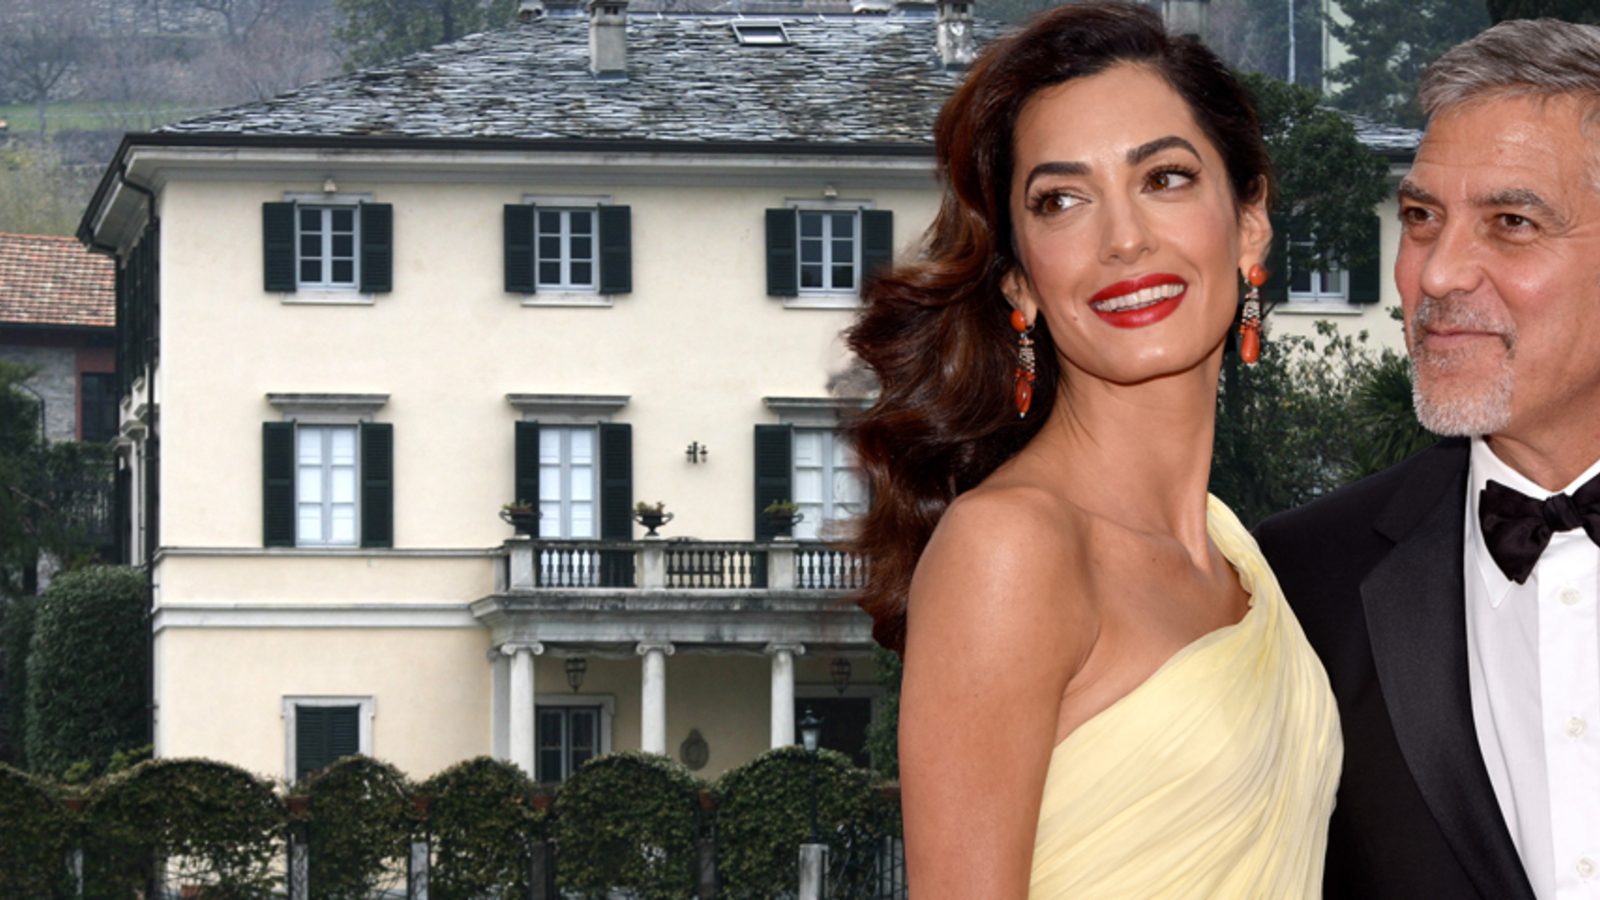 George and Amal Clooney sell a villa for 100 million euros